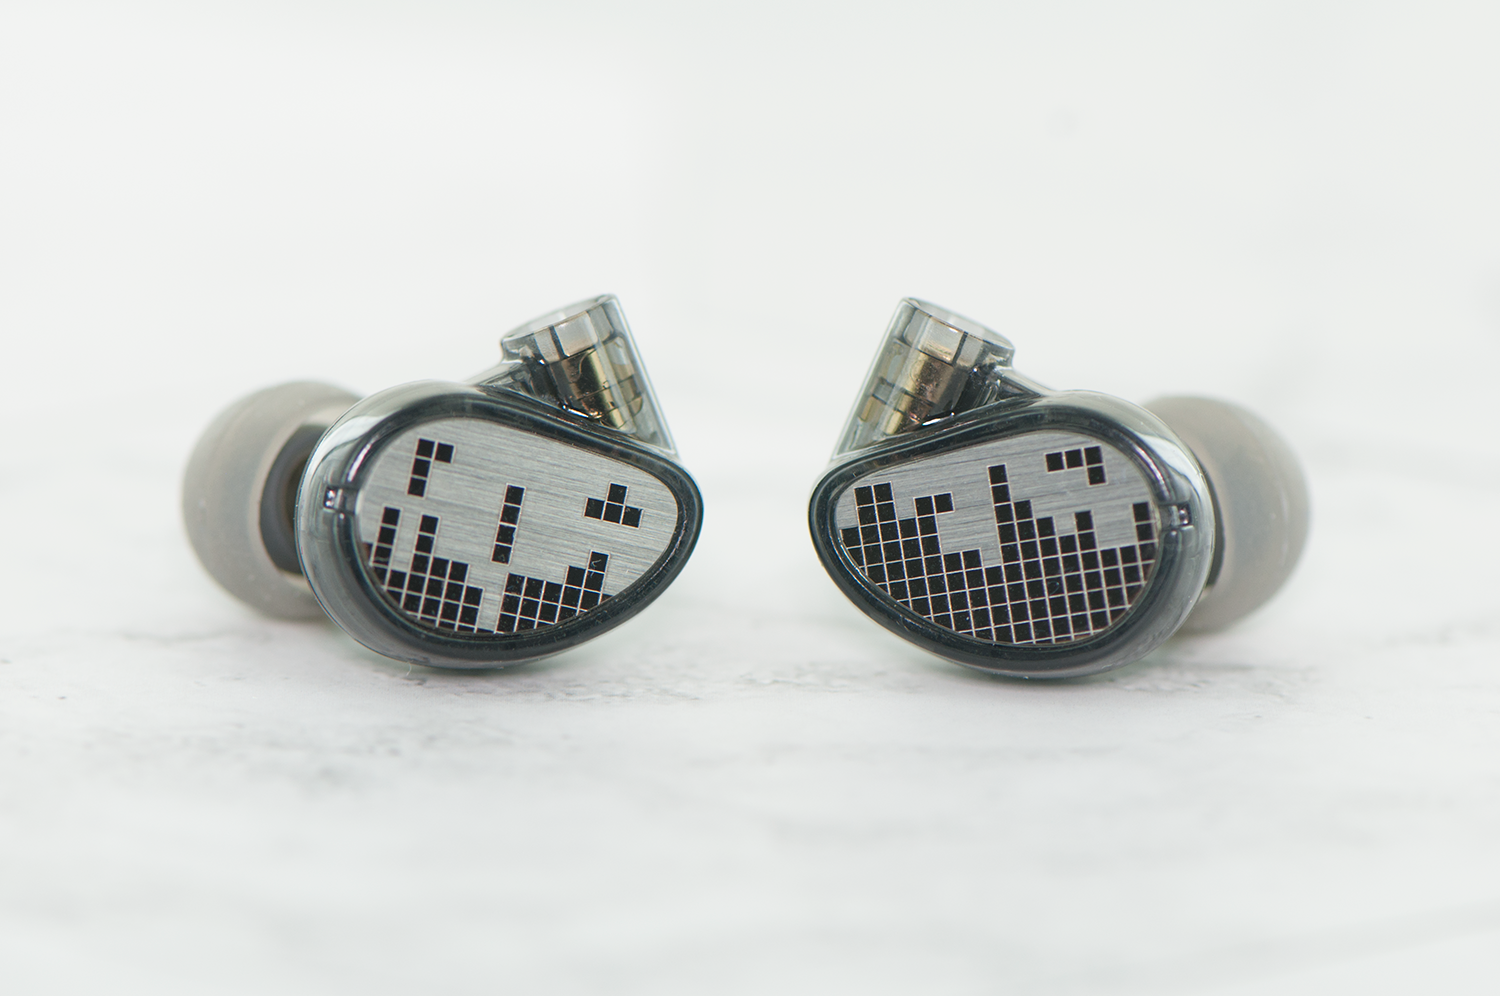 Two high-end, black and silver in-ear monitors with a unique hexagonal design and shiny metallic finish, set against a white background.